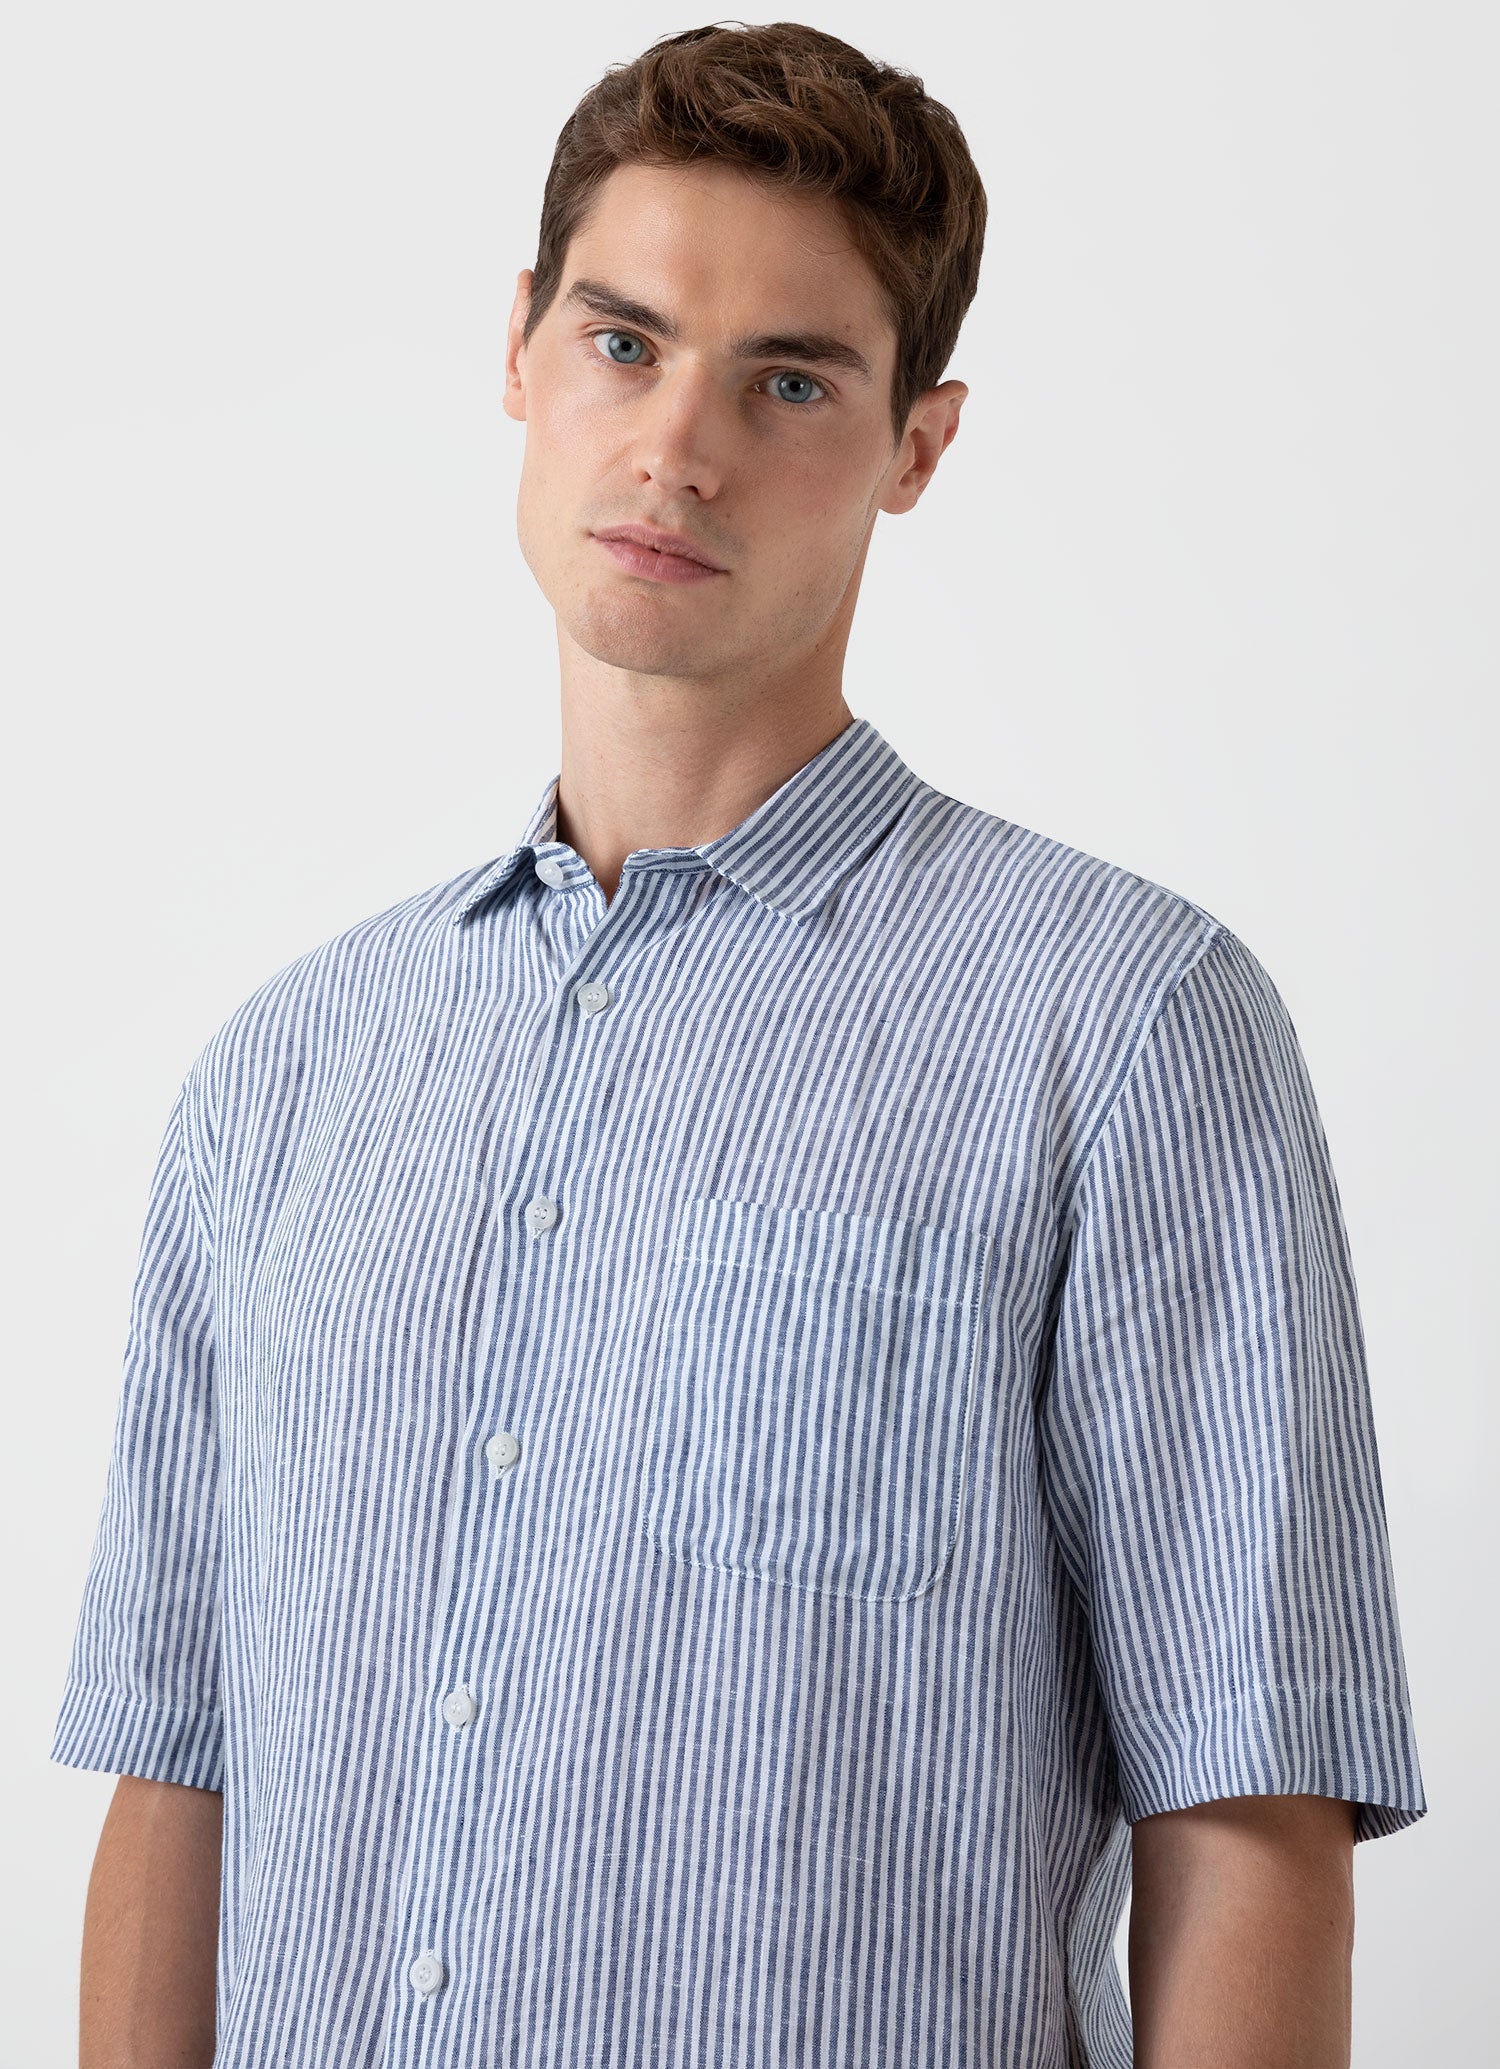 Off-White Camp Collar Extra Slim Fit Shirt in Knitted Egyptian Cotton